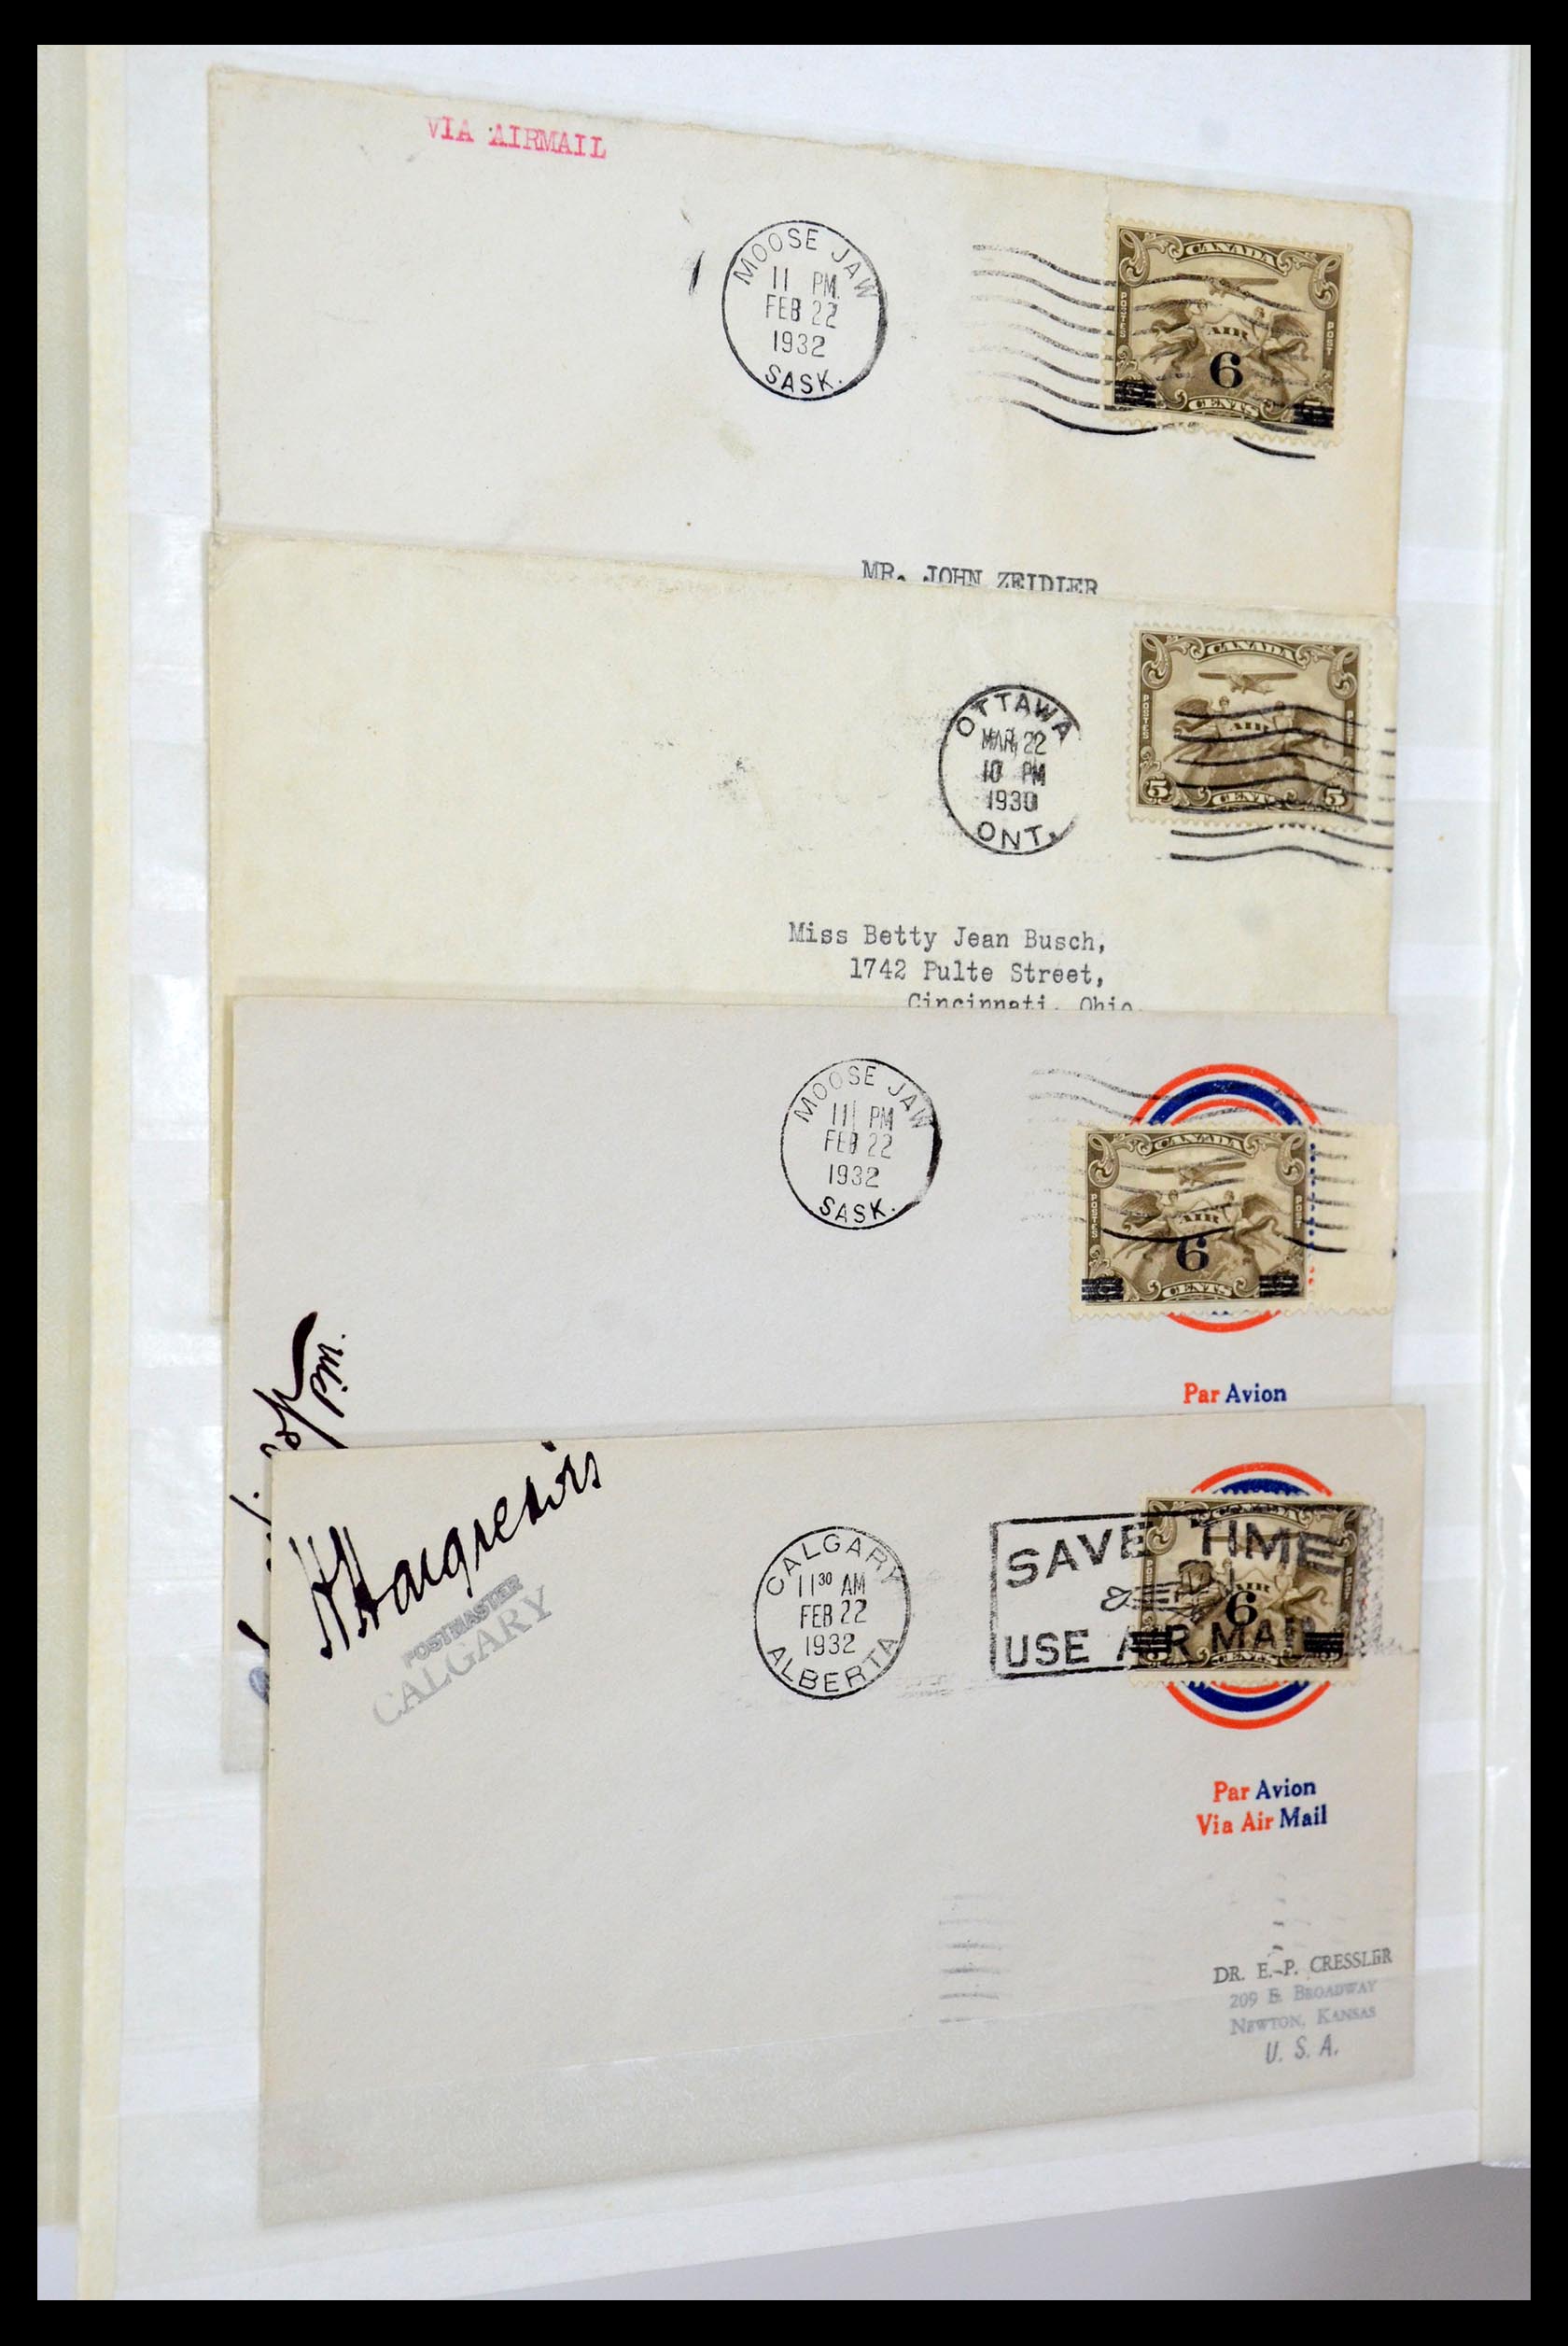 35338 339 - Stamp Collection 35338 Canada airmail covers 1927-1950.